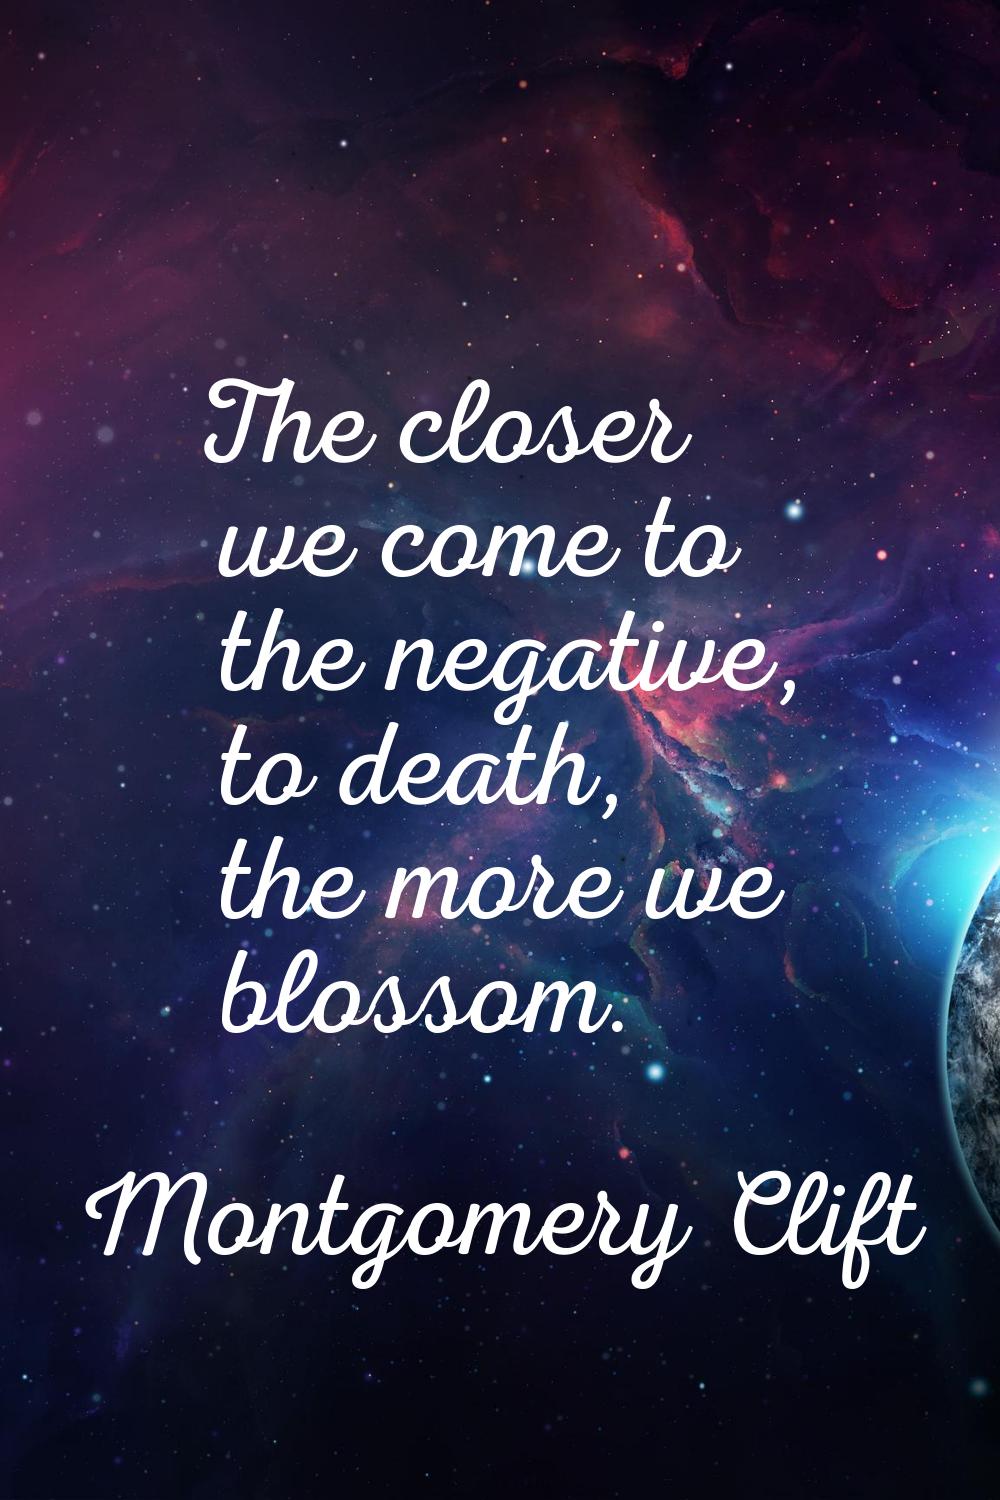 The closer we come to the negative, to death, the more we blossom.